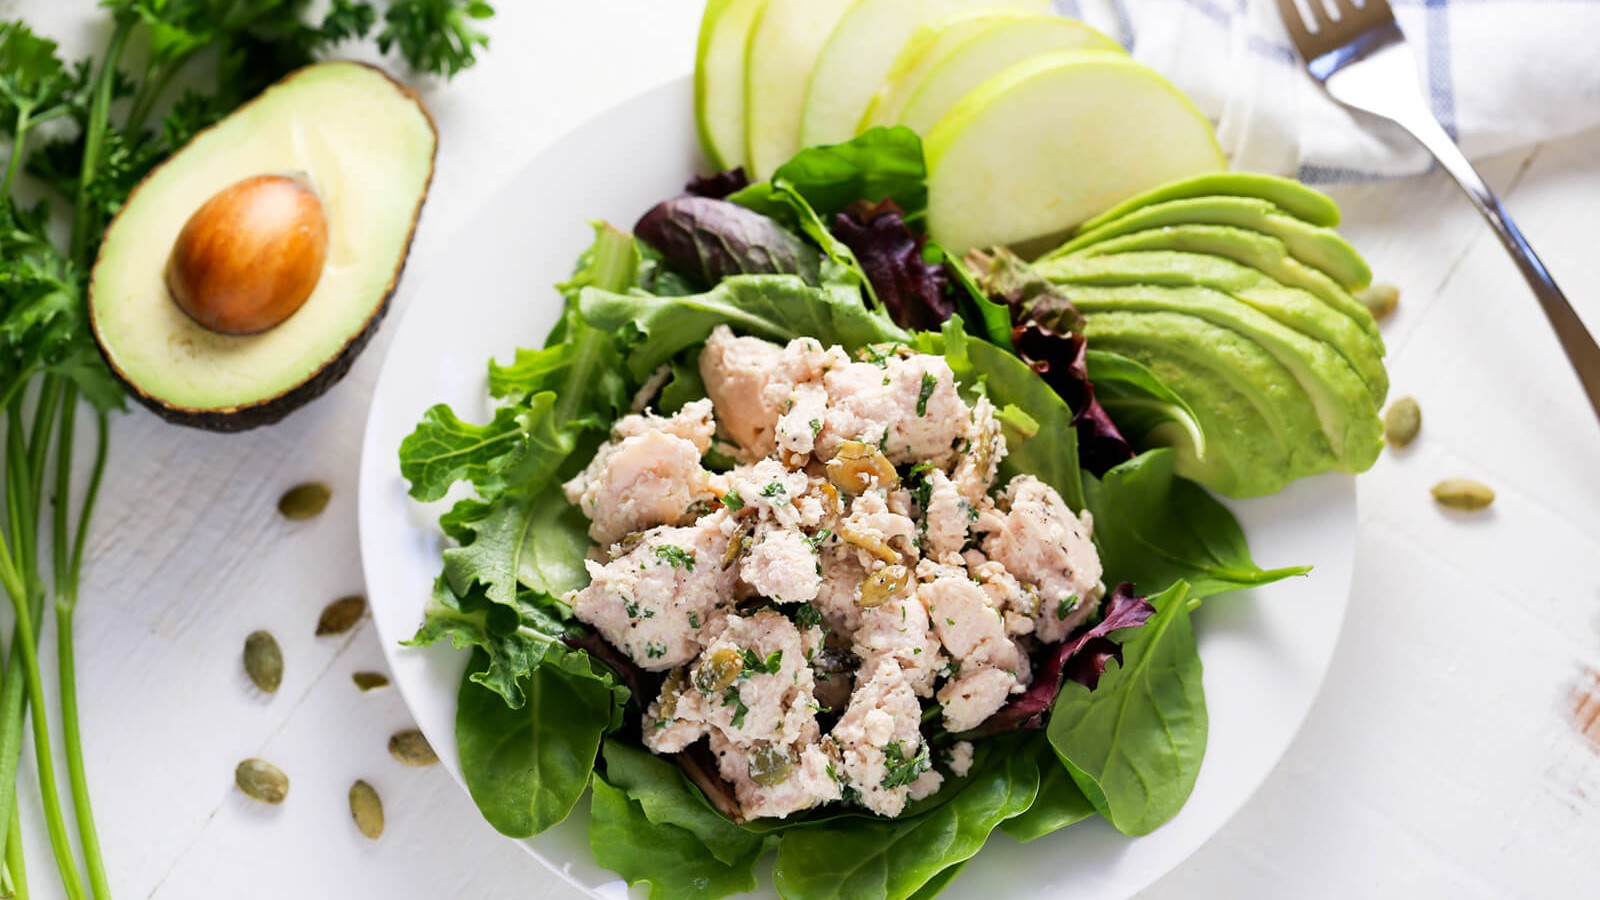 Image of Chicken Salad with Avocado and Apples